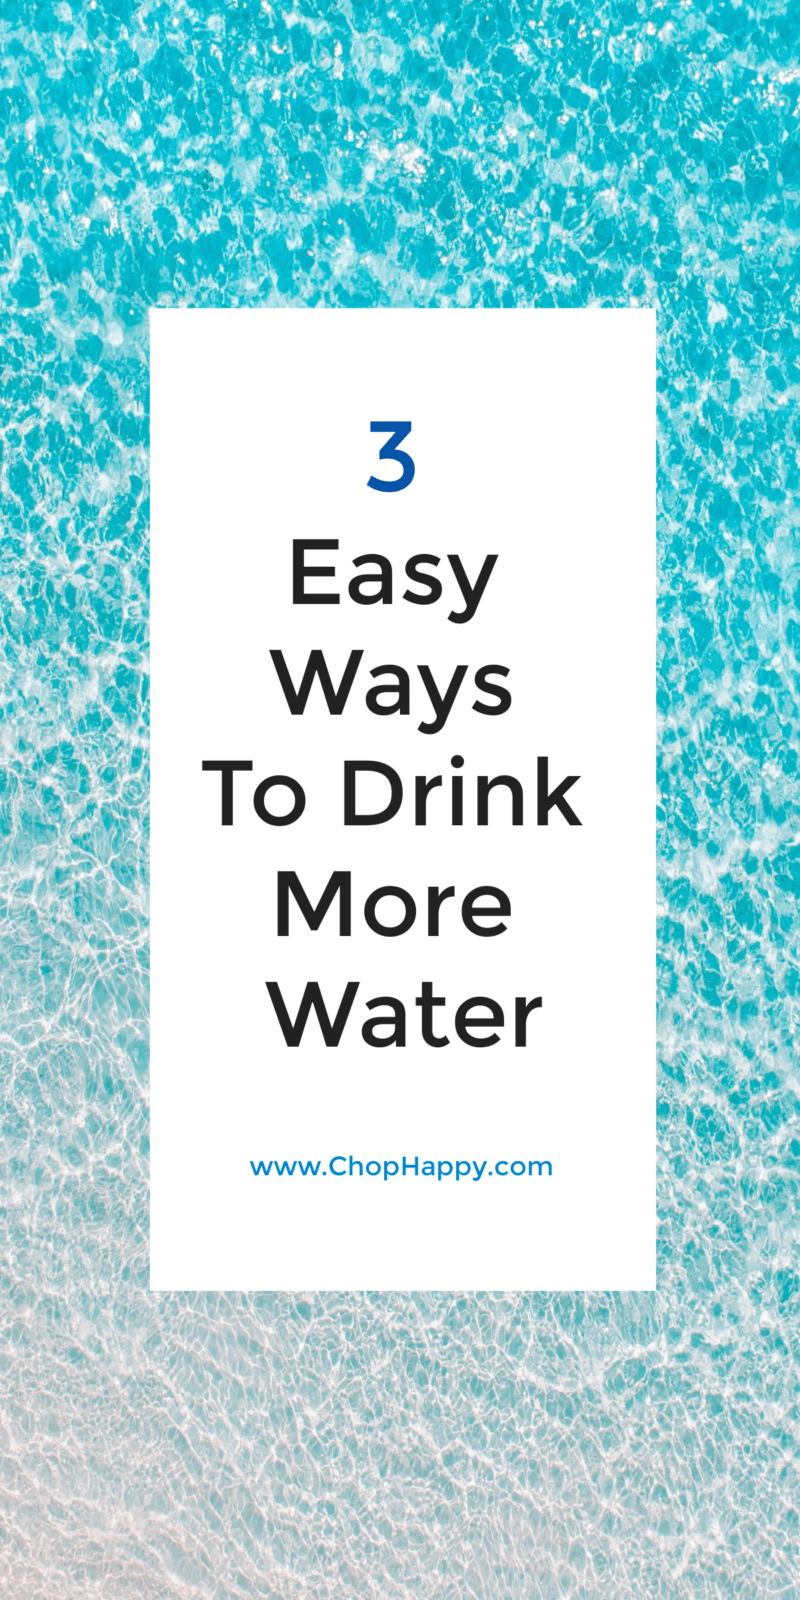 3 Ways to Drink More Water. Drinking more water is great for your health, helps you eat less, and helps you loose weight. Drink more water and be healthy with these 3 tools.